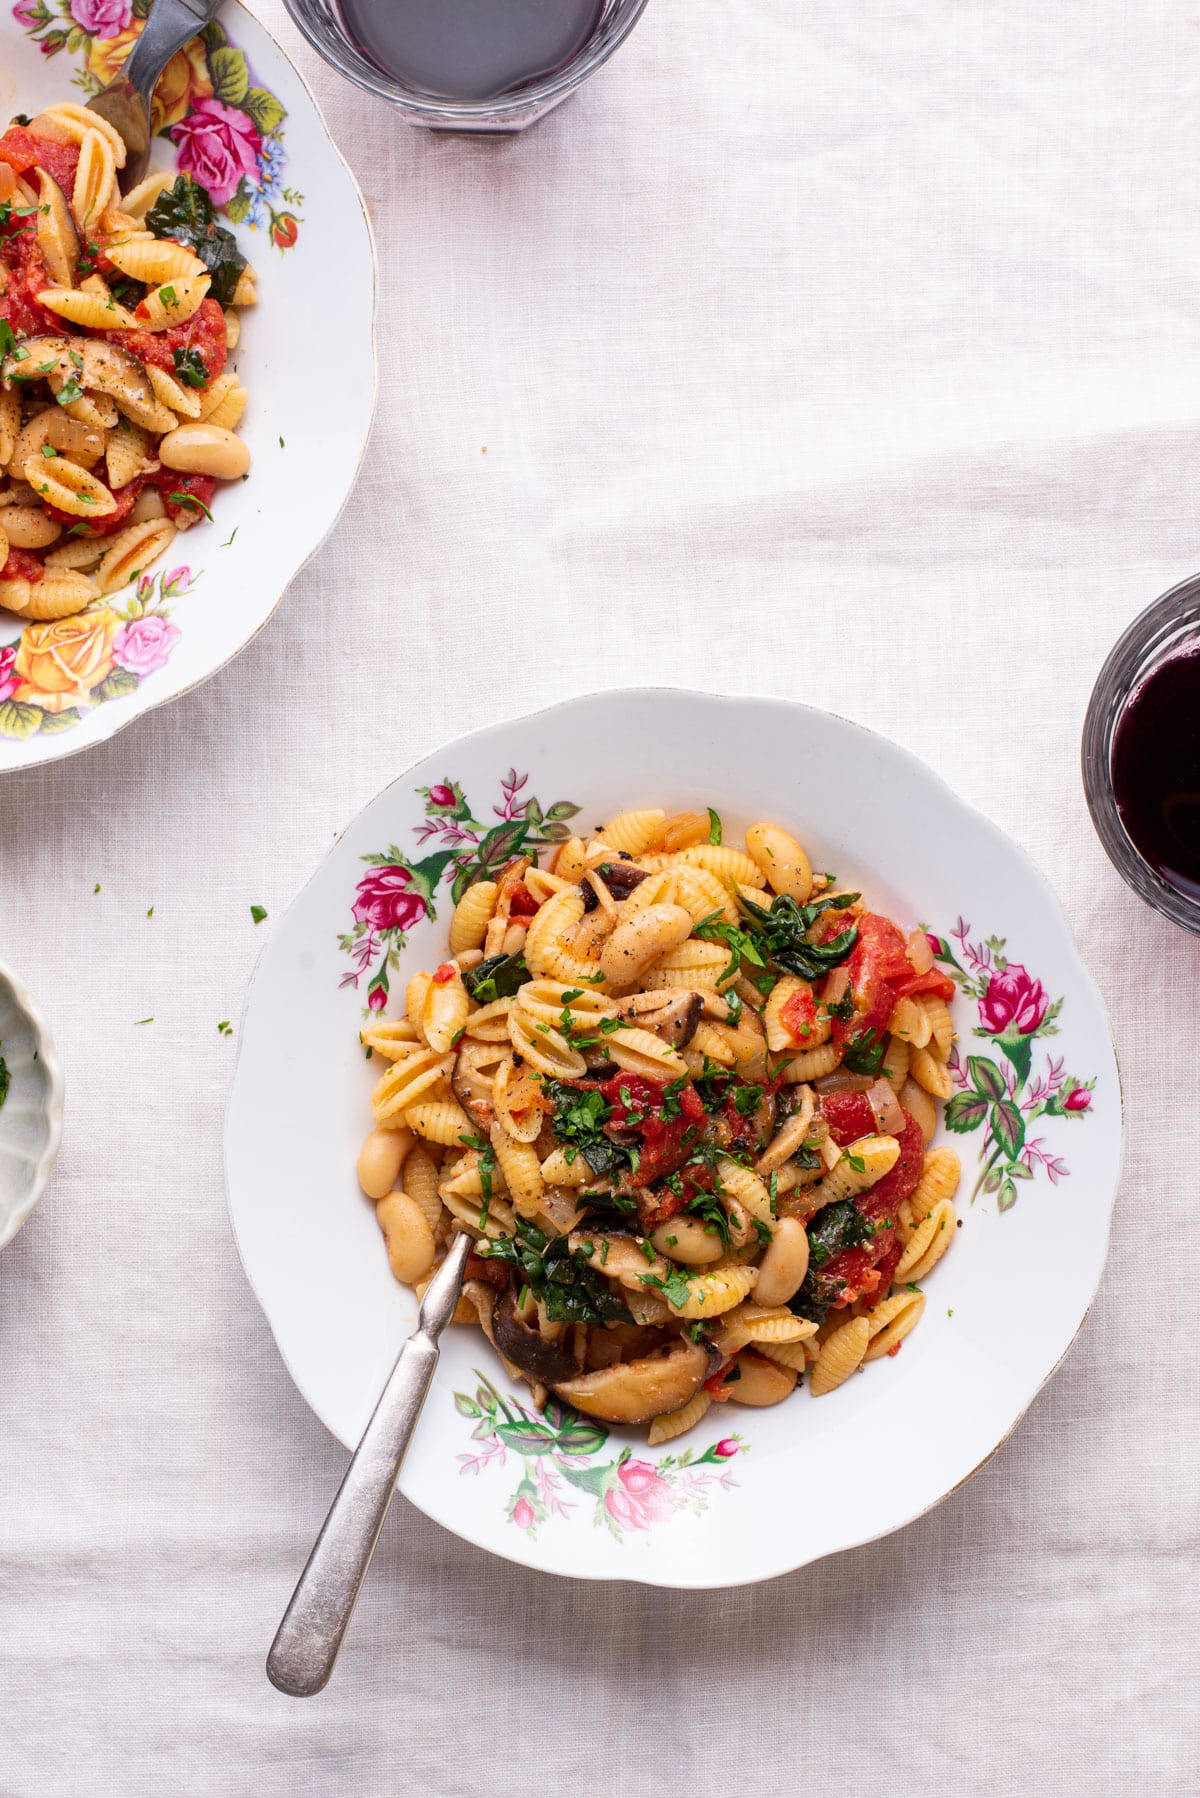 Two plates of pasta with beans and greens next to glasses of wine.